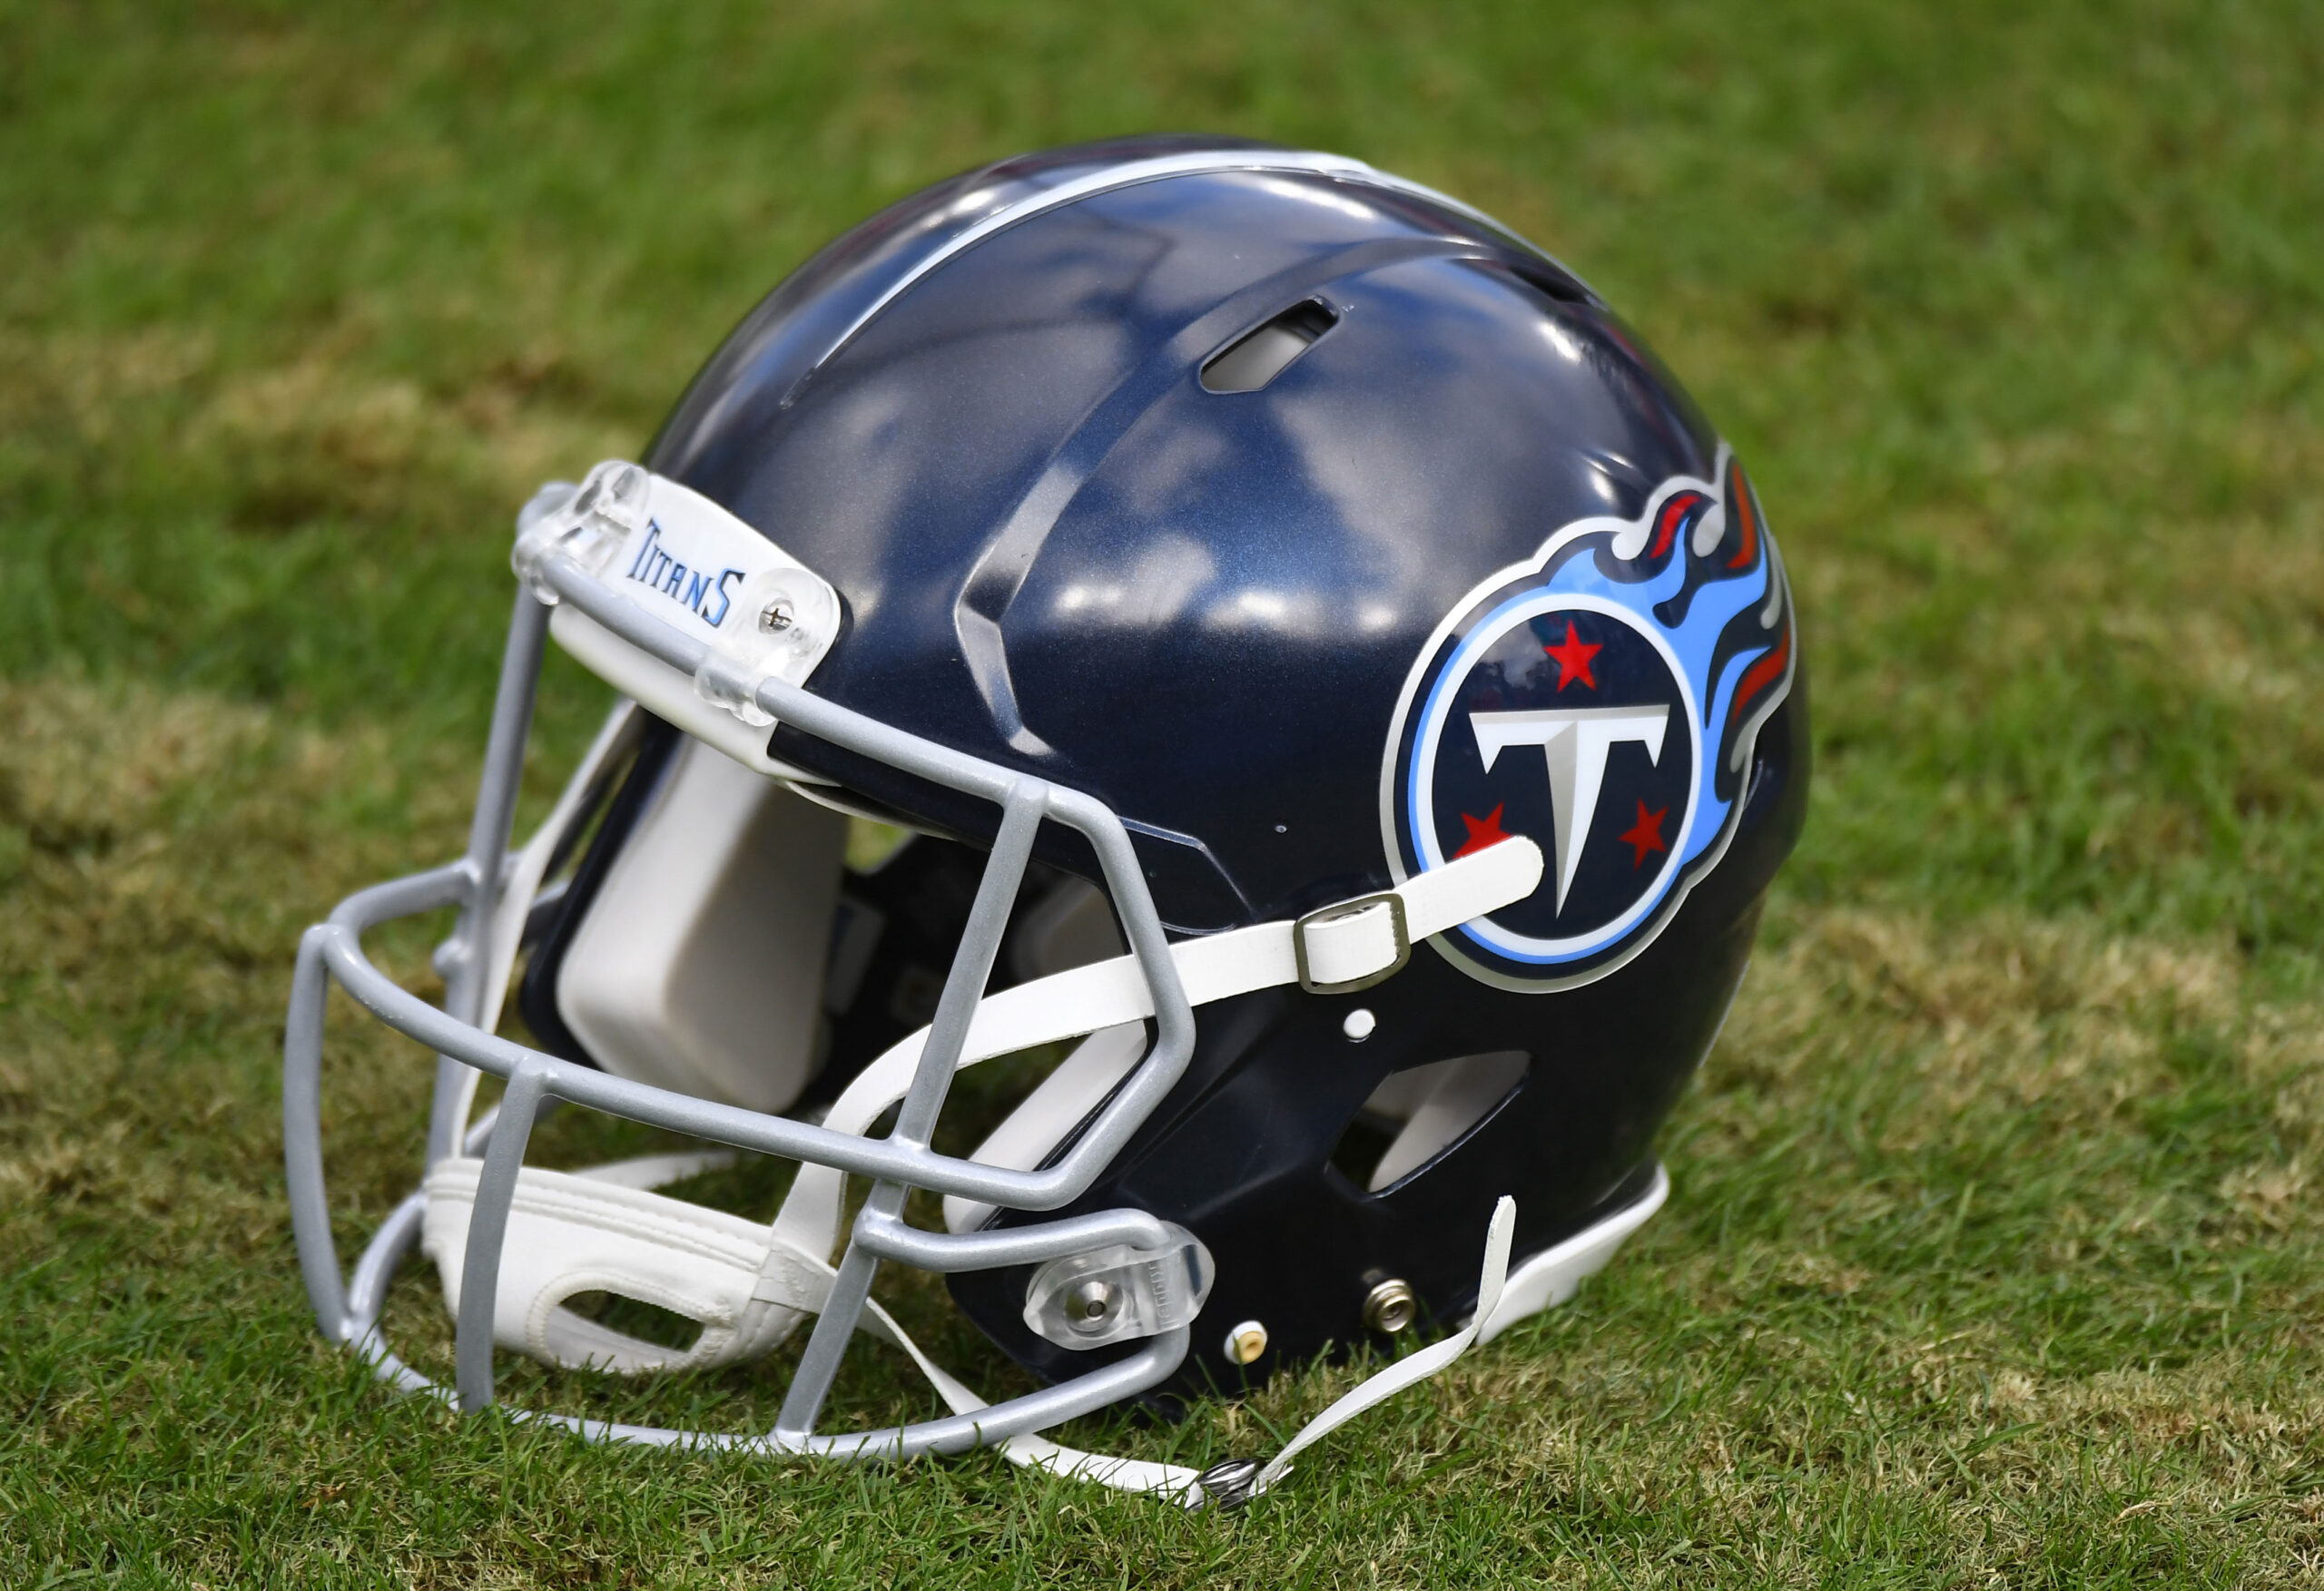 Titans hosted Princeton OL Henry Byrd for a workout